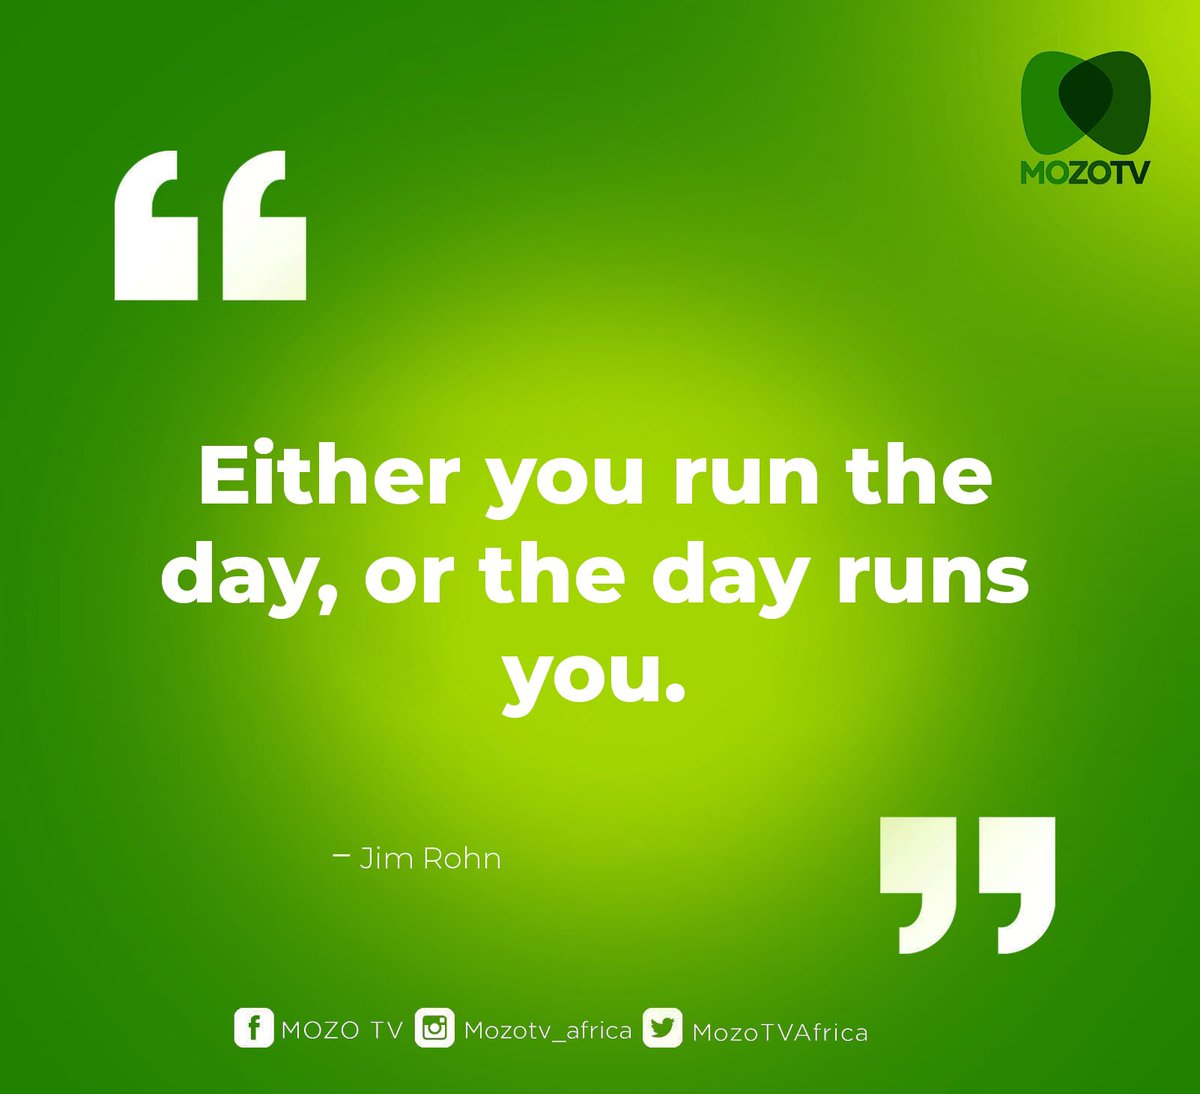 Happy New Week! Remember to run the day! You got this! Have a great day and week💚 Tune In Now! TopStar Channel 108 and 544 on DTH (Dish)💚 Also, install the Startimes APP via the link below 👇🏾: play.google.com/store/apps/det…... #MozoTV #ARefreshingExperience #Productivity #NewWeek